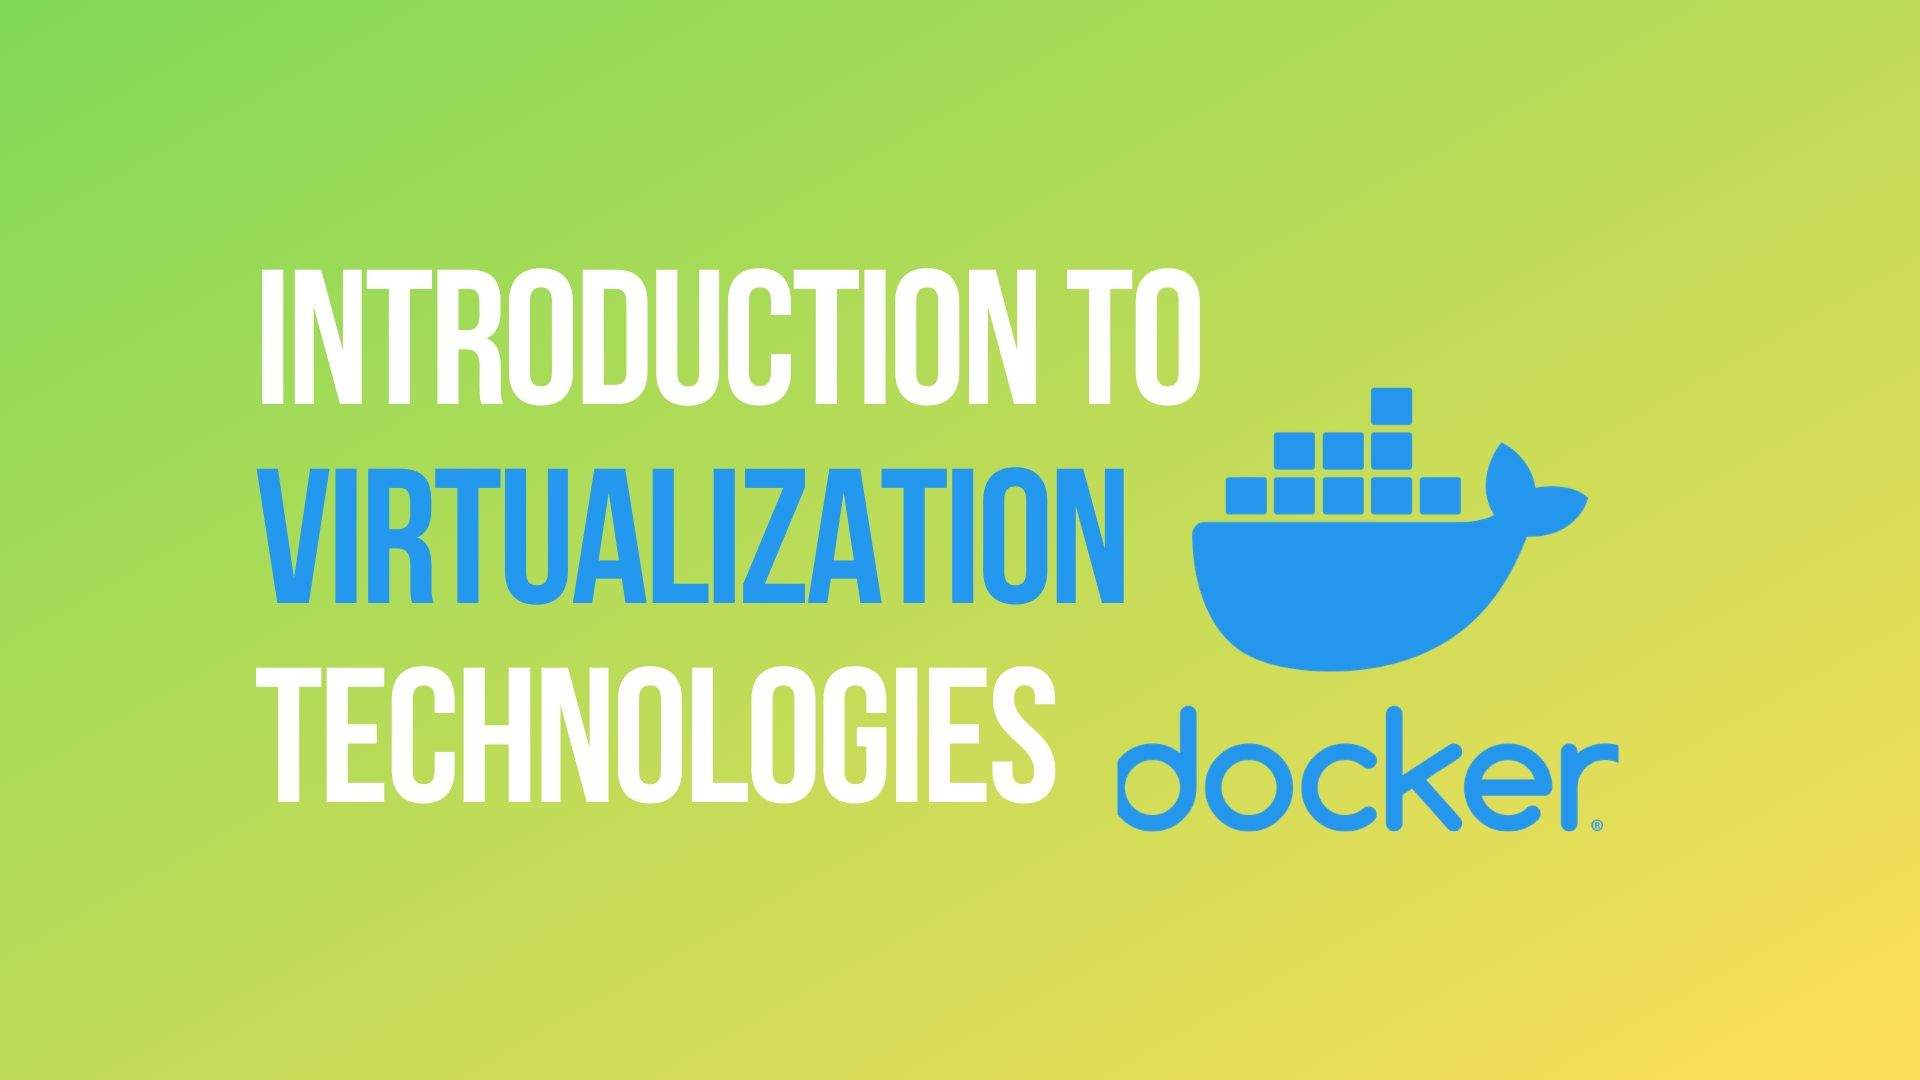 Introduction to Virtualization Technology